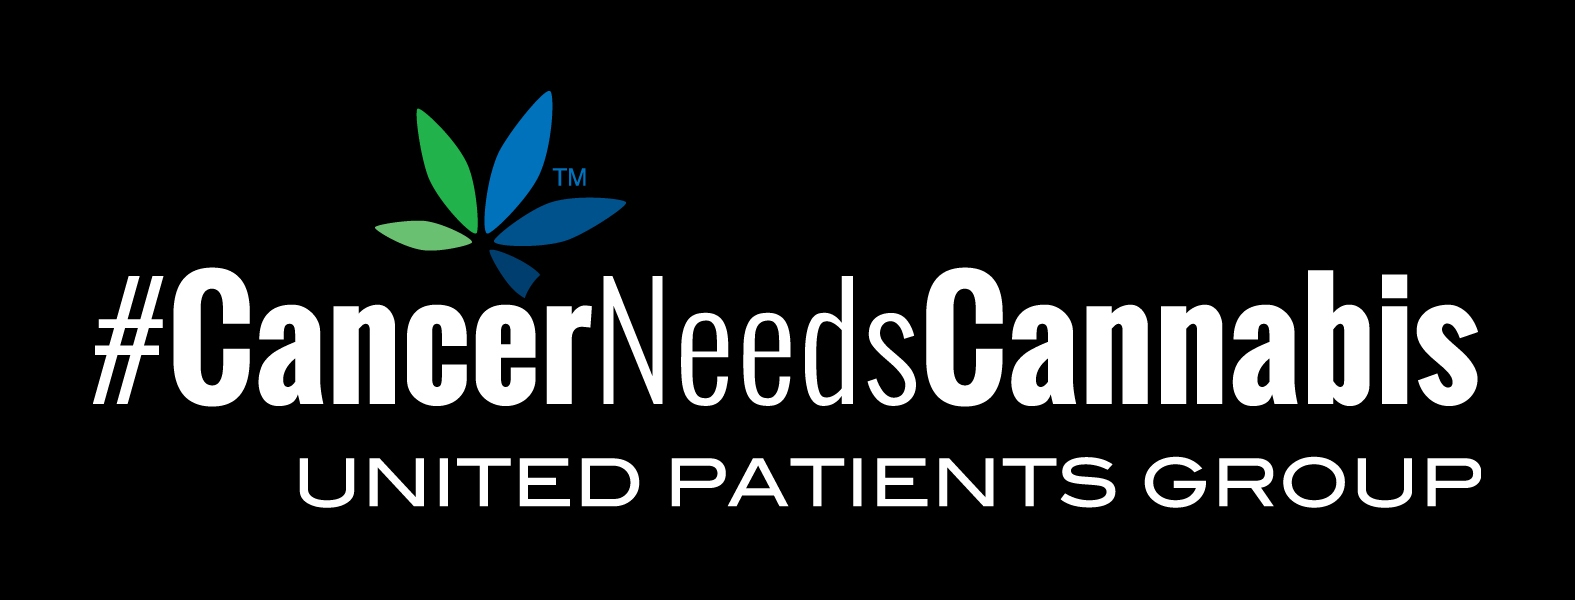 National Cancer Moonshot Initiative: An Open Letter and Video From United Patients Group and the Medical Cannabis Community to VP Biden